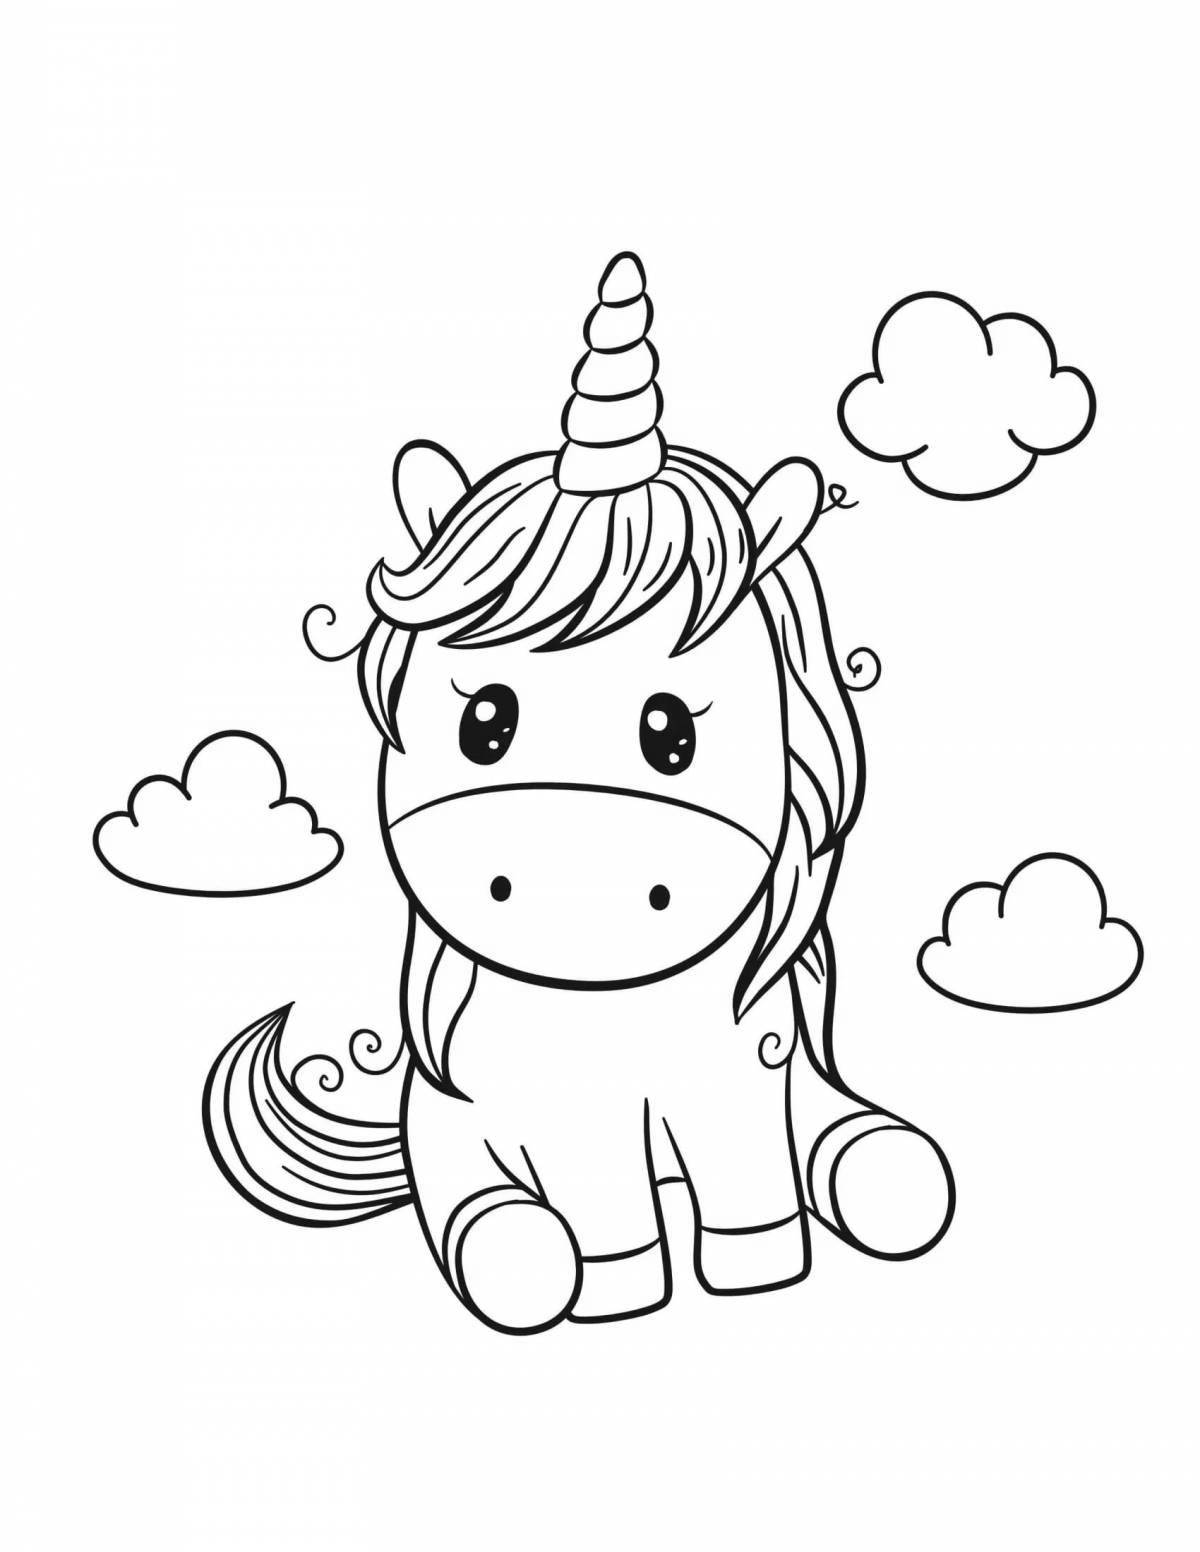 Great unicorn drawing for kids